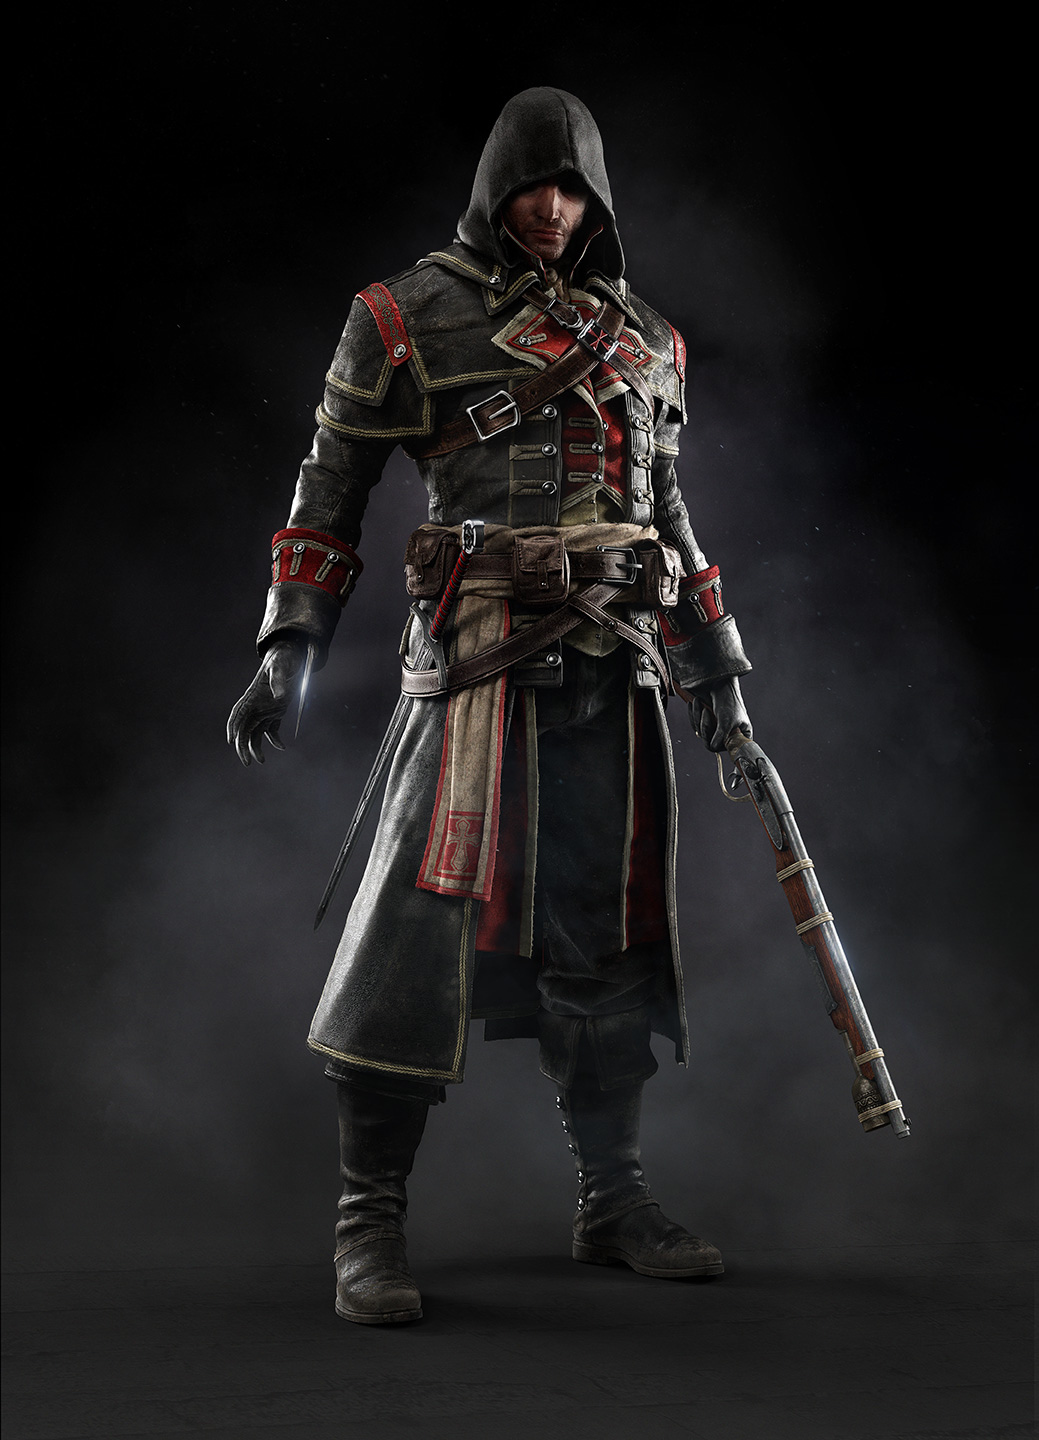 AssassinS Creed Rogue 1 Background   Trendy Wallpapers 1039x1440